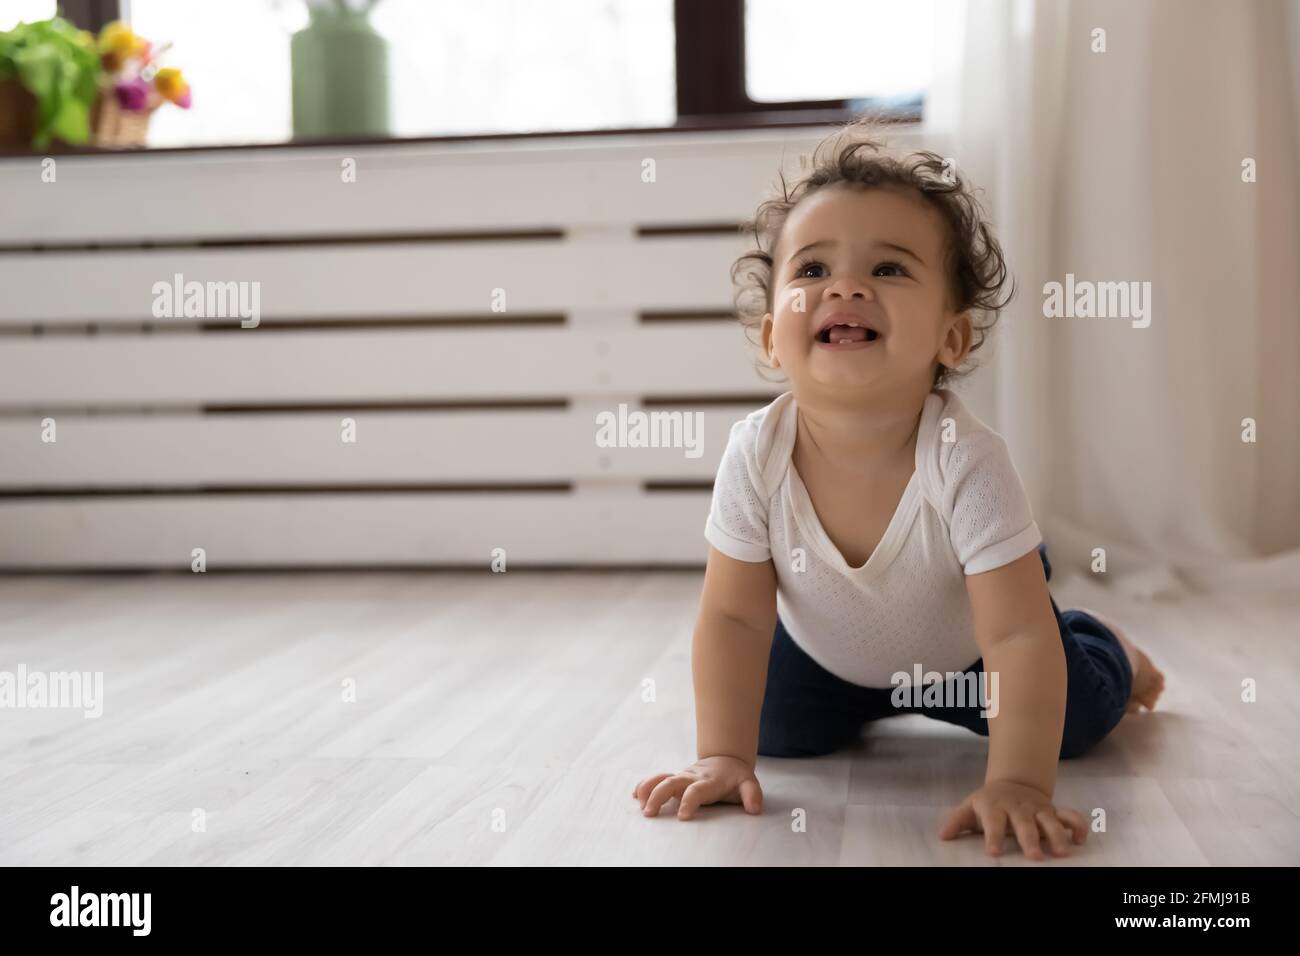 Smiling African American baby child crawling on floor Stock Photo